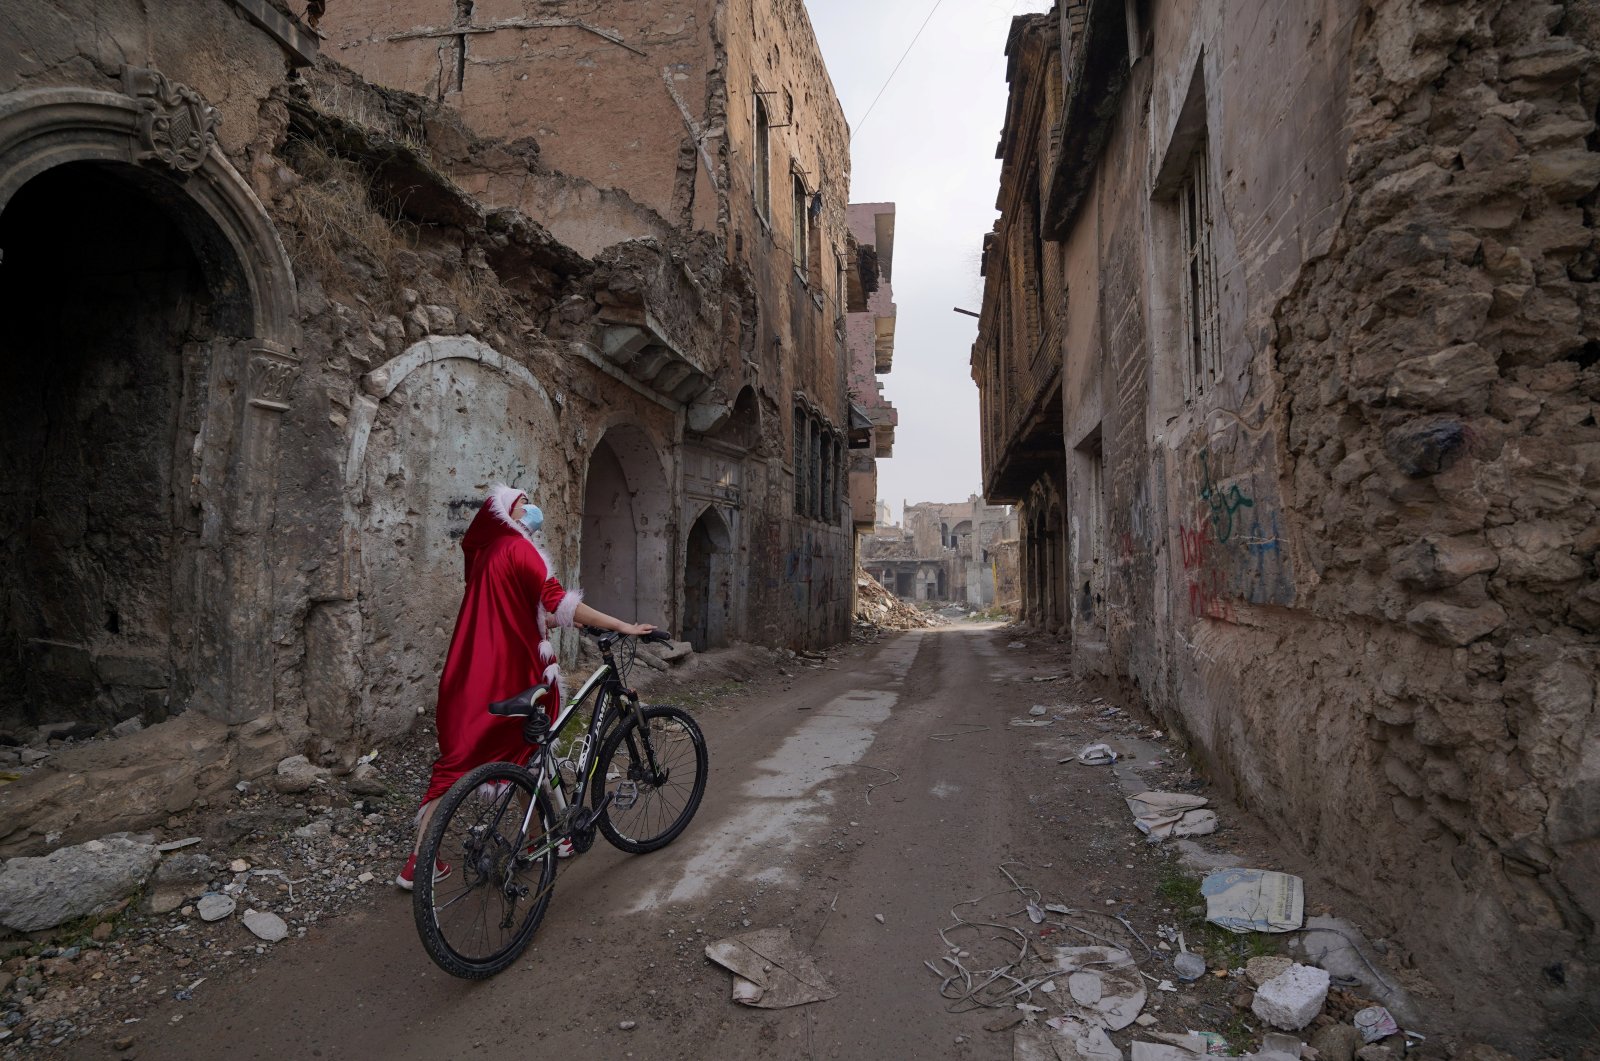 An Iraqi woman, dressed as Santa Claus, looks at the destroyed buildings as she walks with her bicycle in the old city of Mosul, Iraq, Dec. 18, 2020. (Reuters Photo)